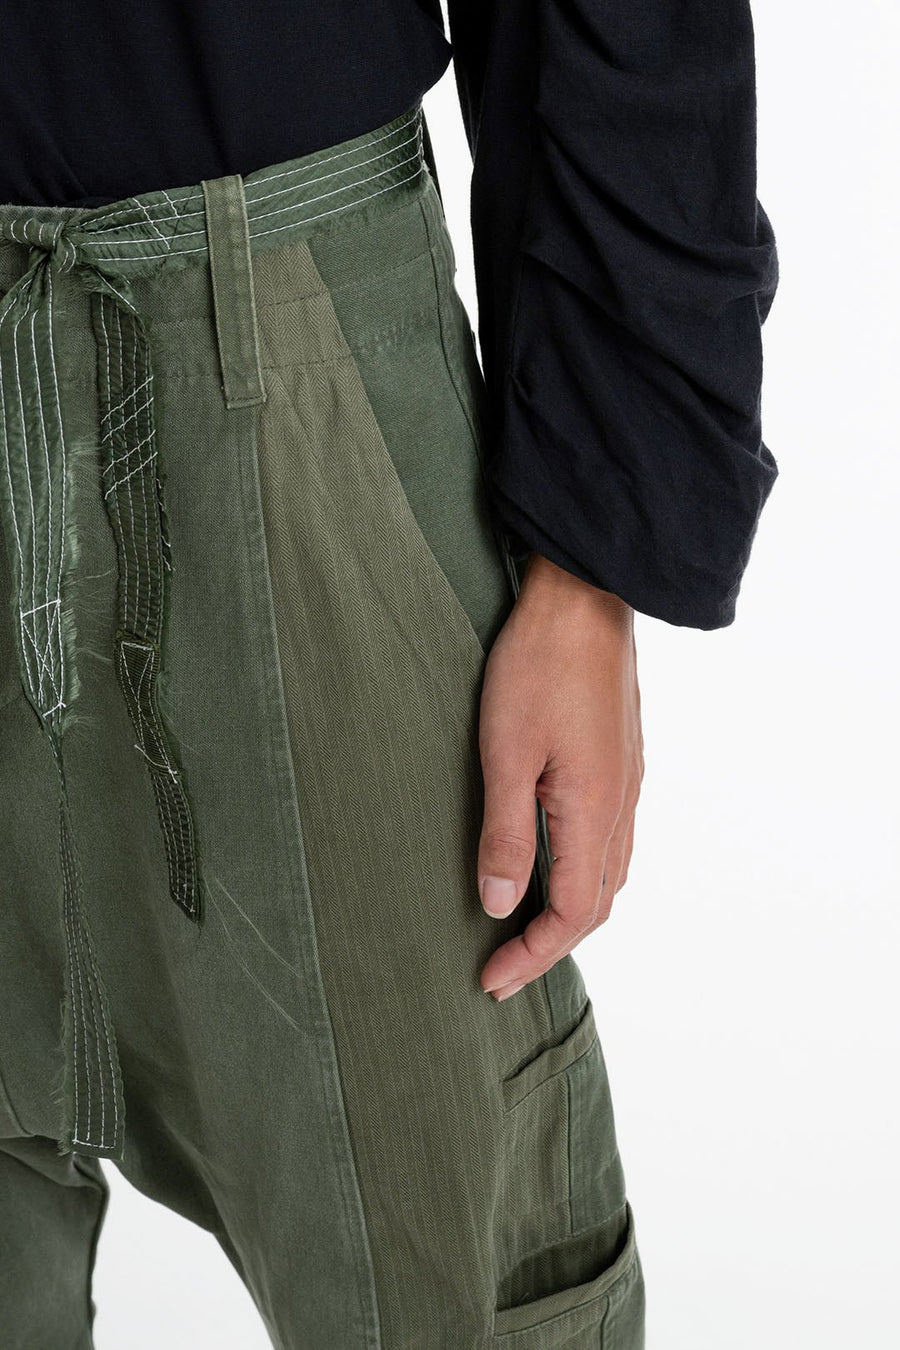 LOVE NOT WAR DROP CROTCH PANT, ARMY - Burning Torch Online Boutique